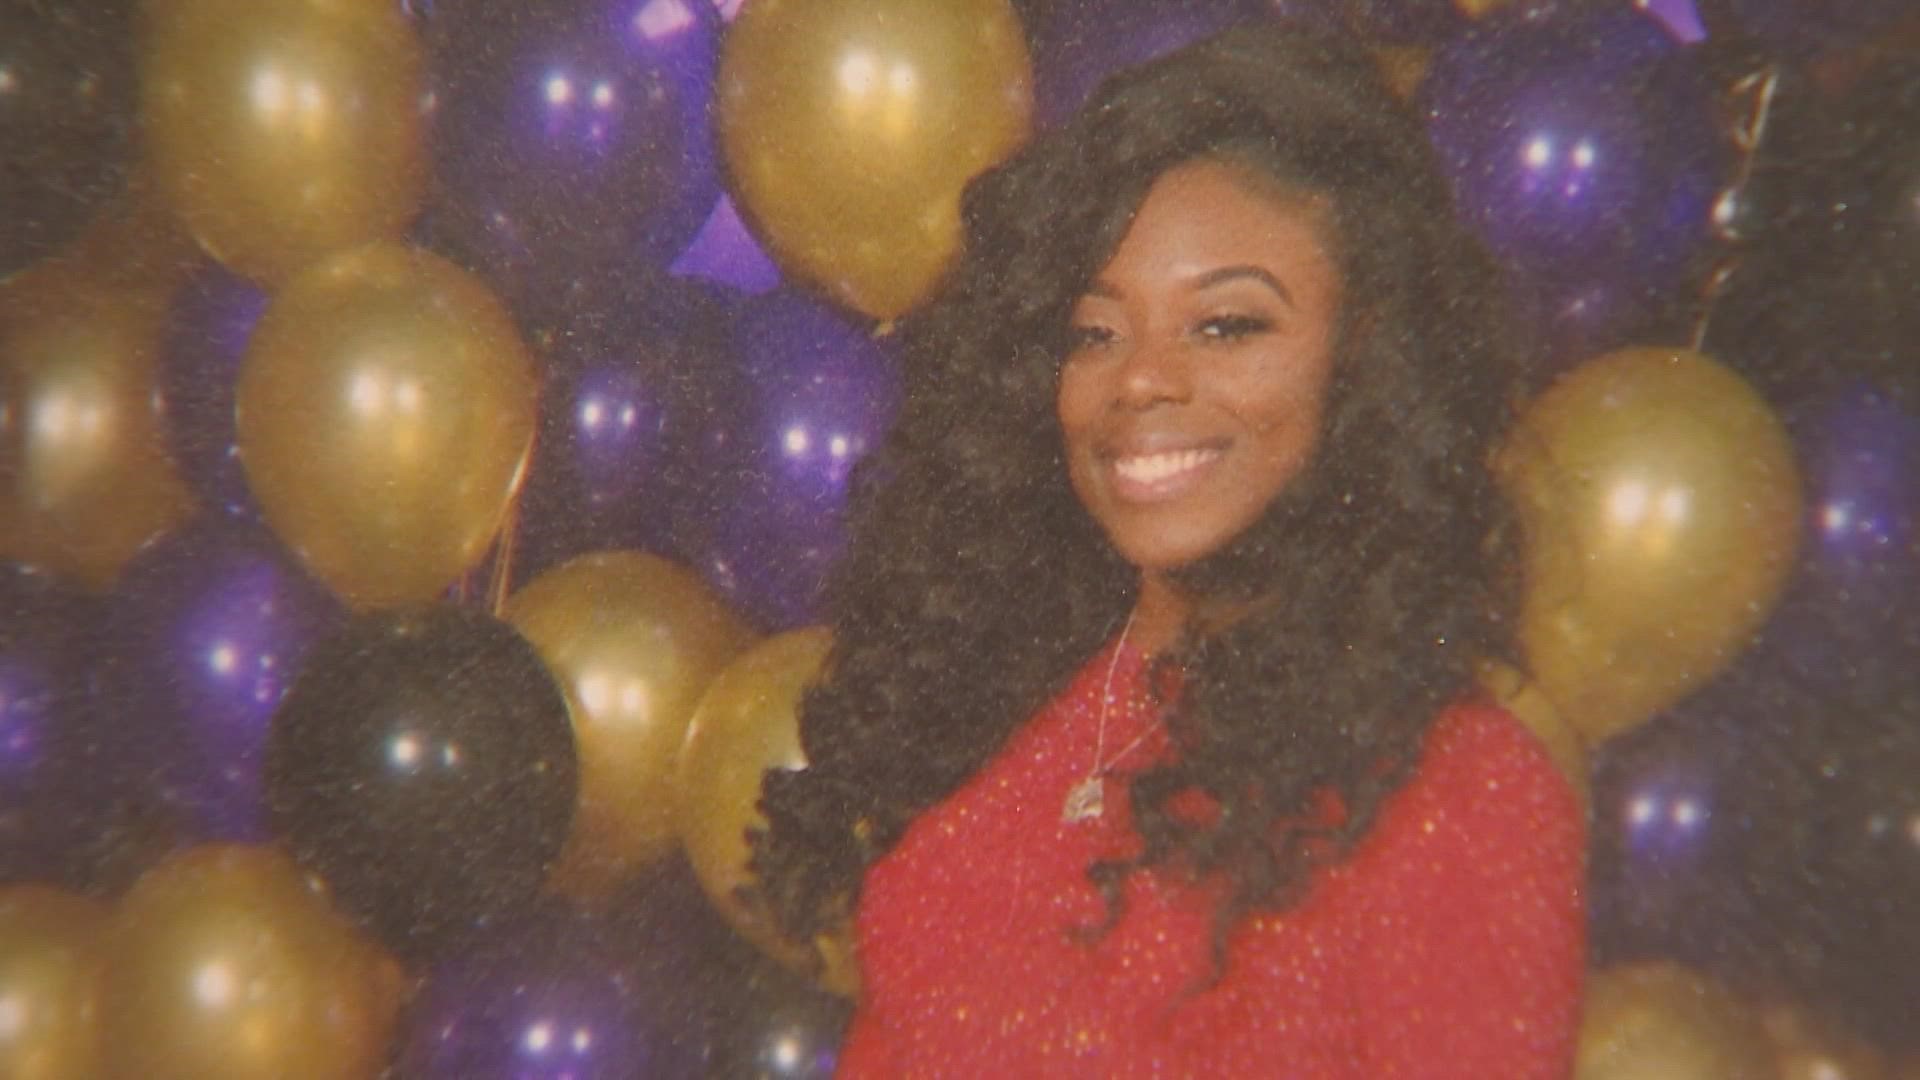 “I’m really torn up right now,” Moneica Anderson said, whose daughter was shot in the head.